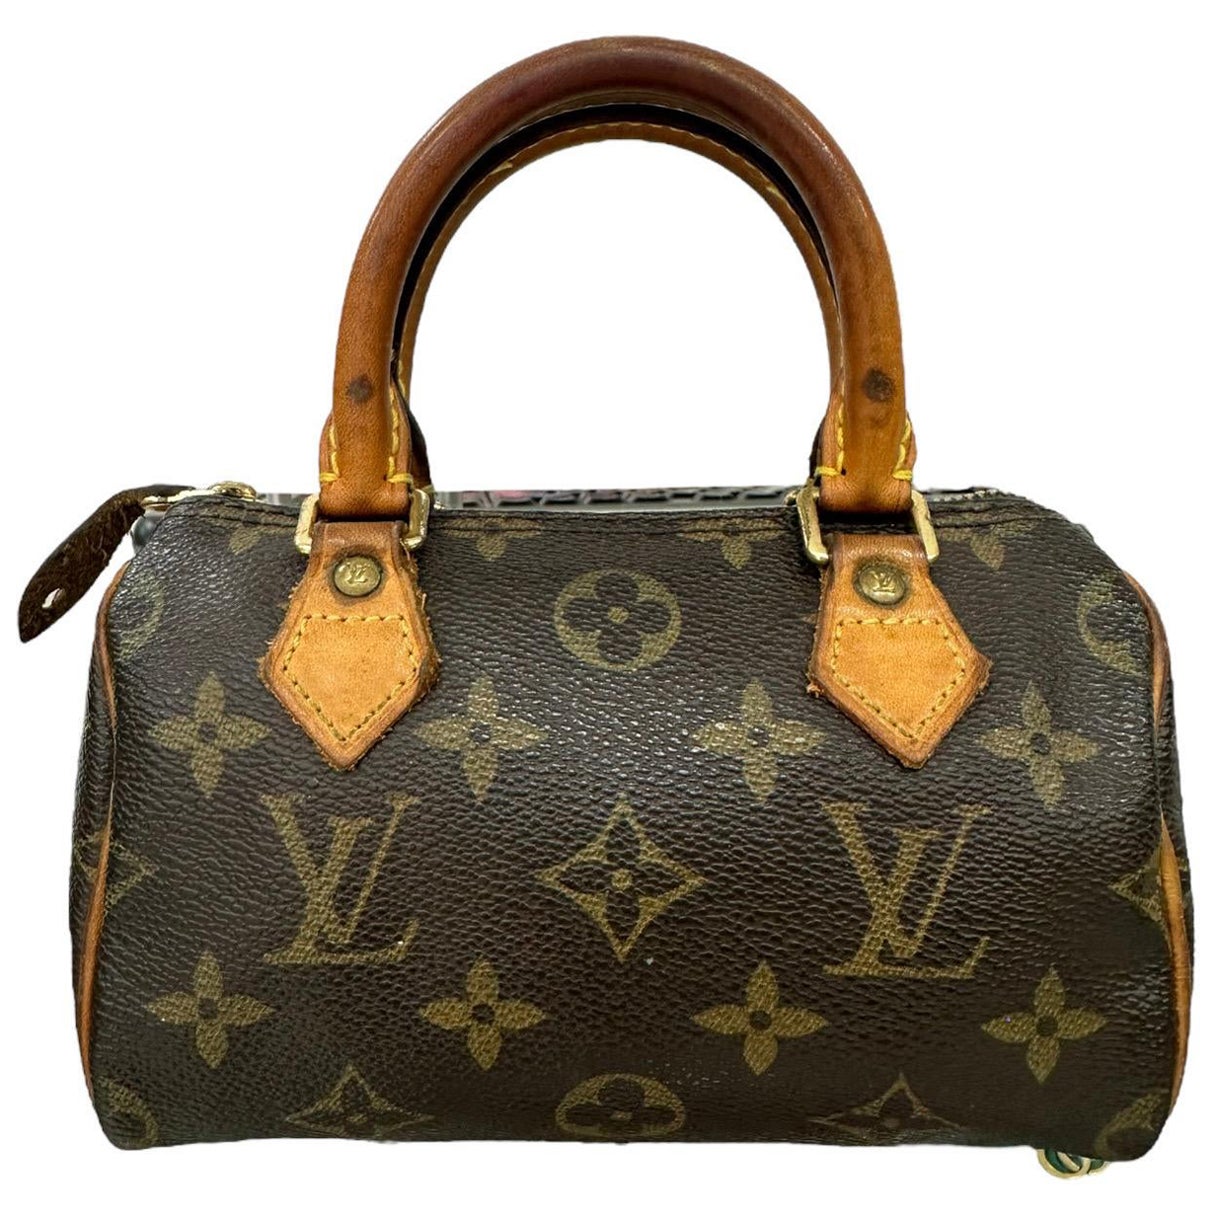 Louis Vuitton Bags A - 1,162 For Sale on 1stDibs  louis vuitton bags on  sale, class a lv bag, louis vuitton bags sale